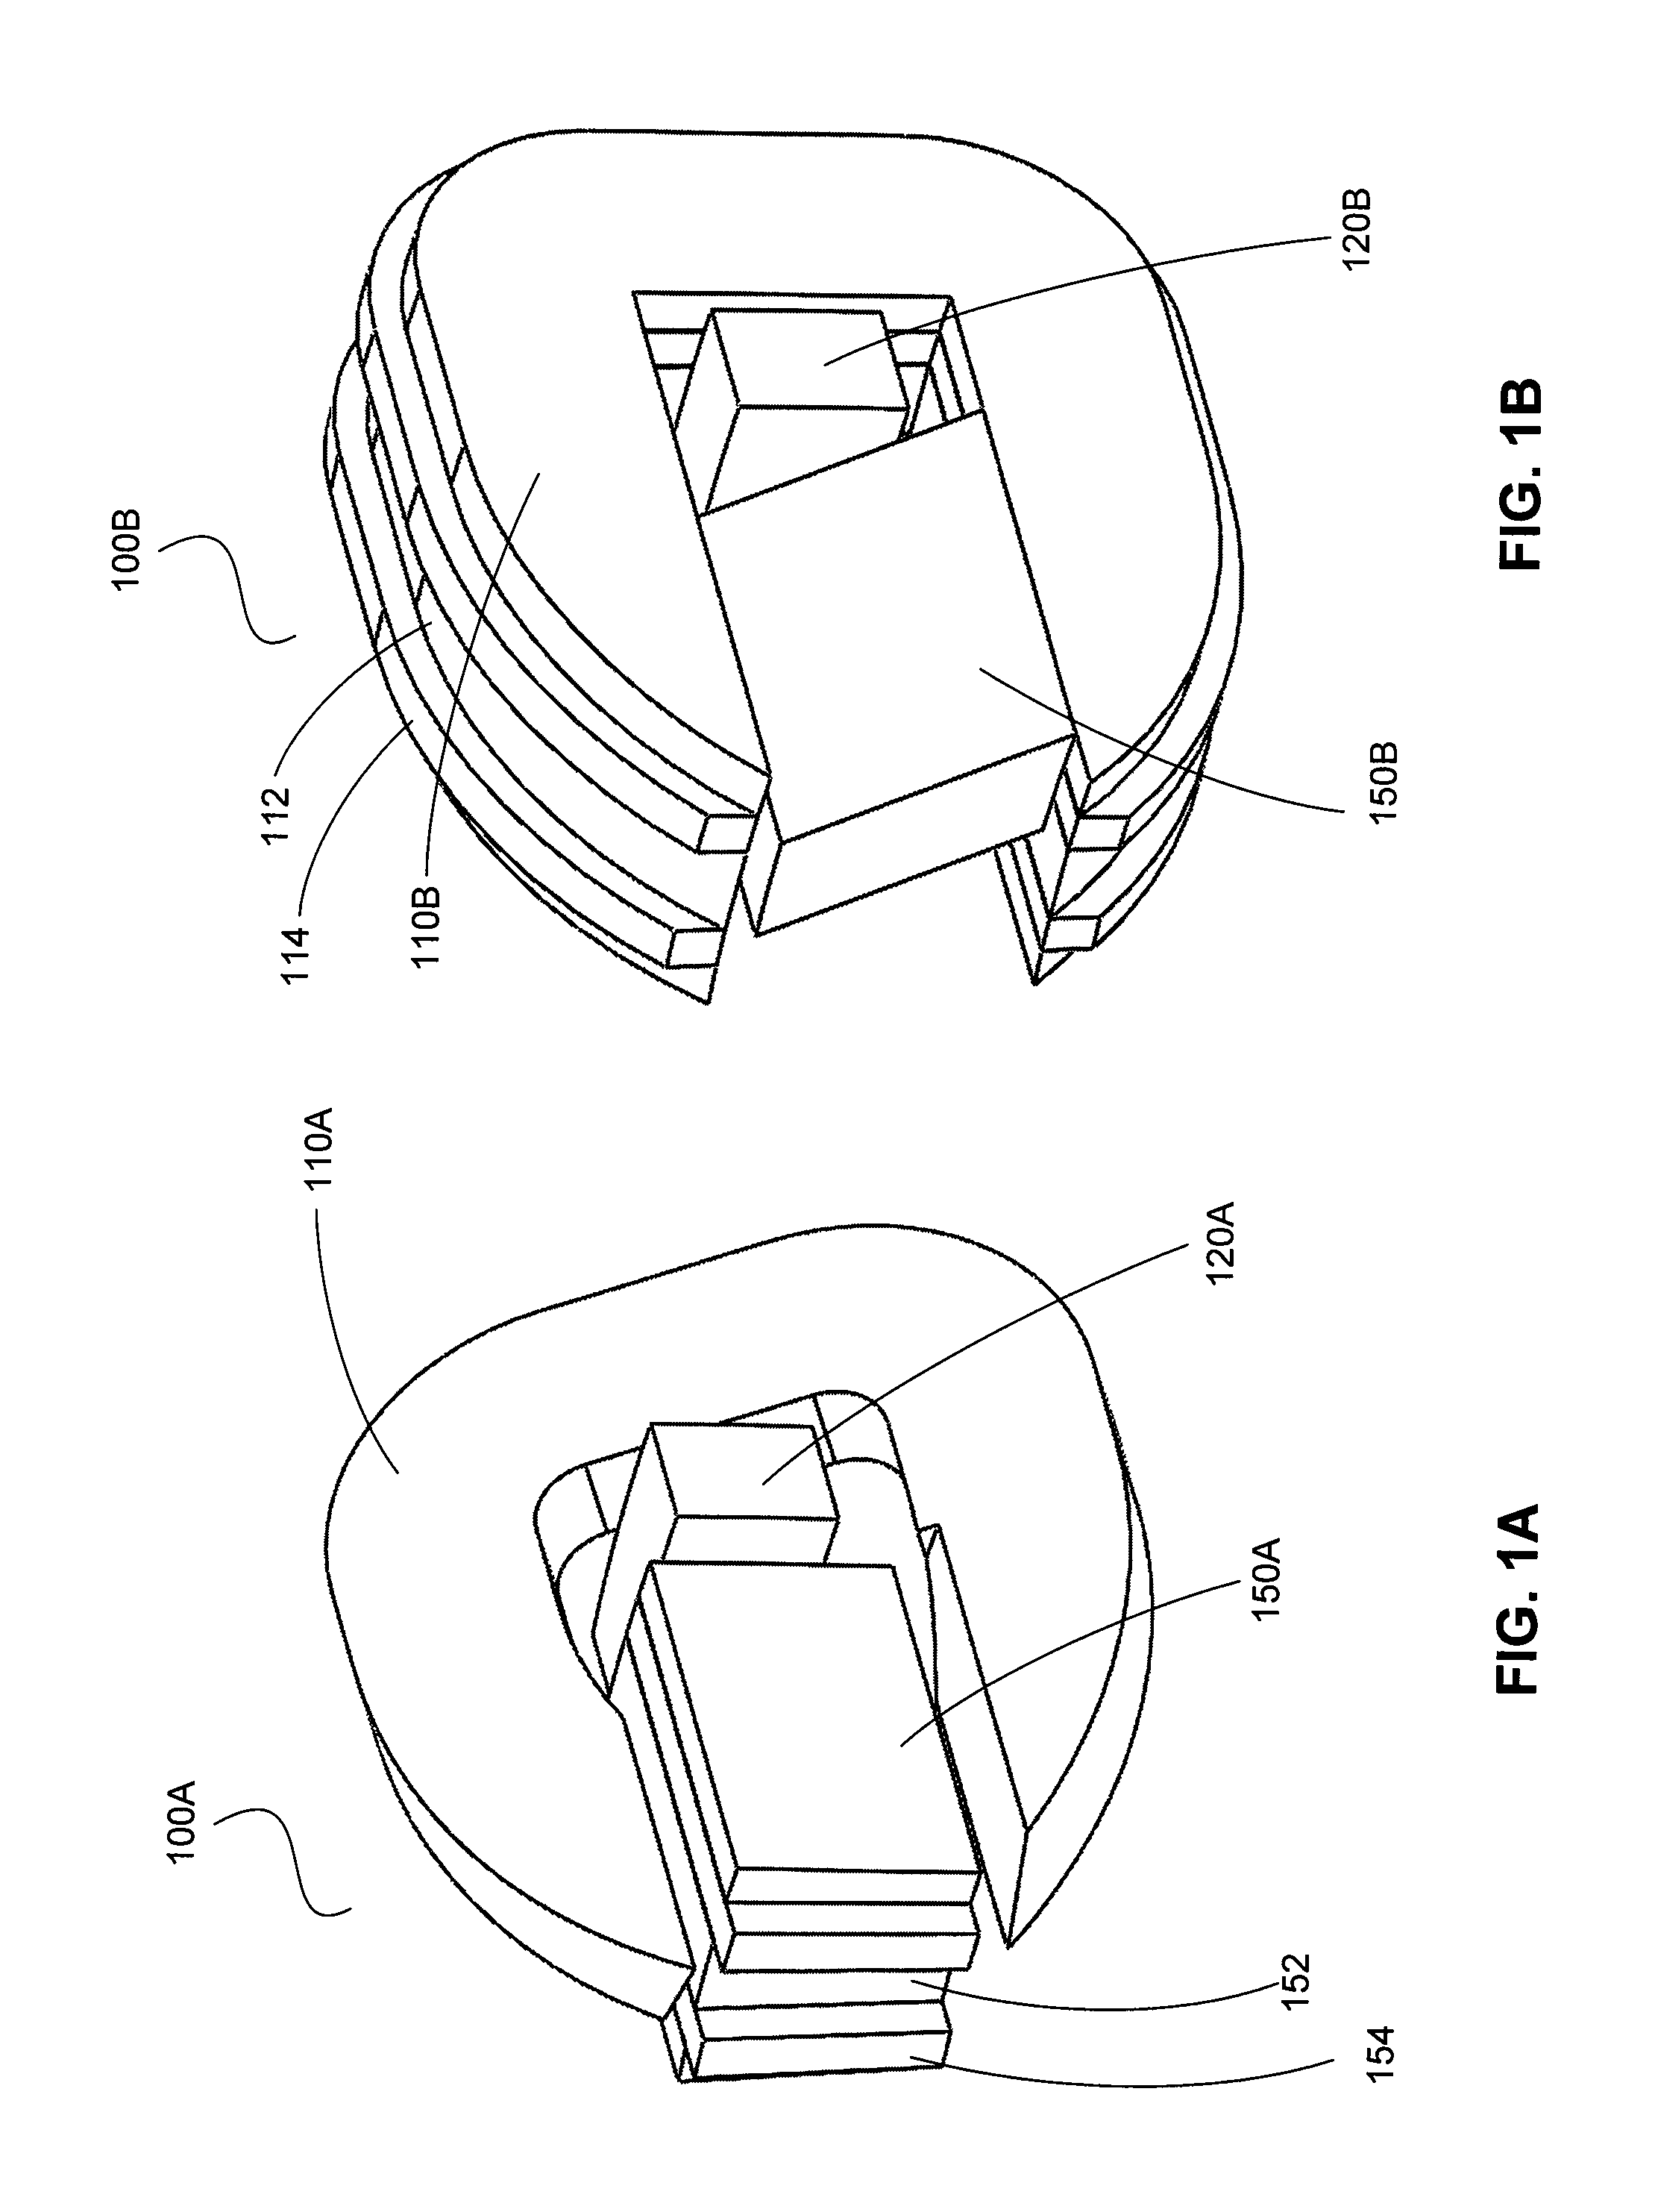 Transverse and/or commutated flux systems having segmented stator laminations